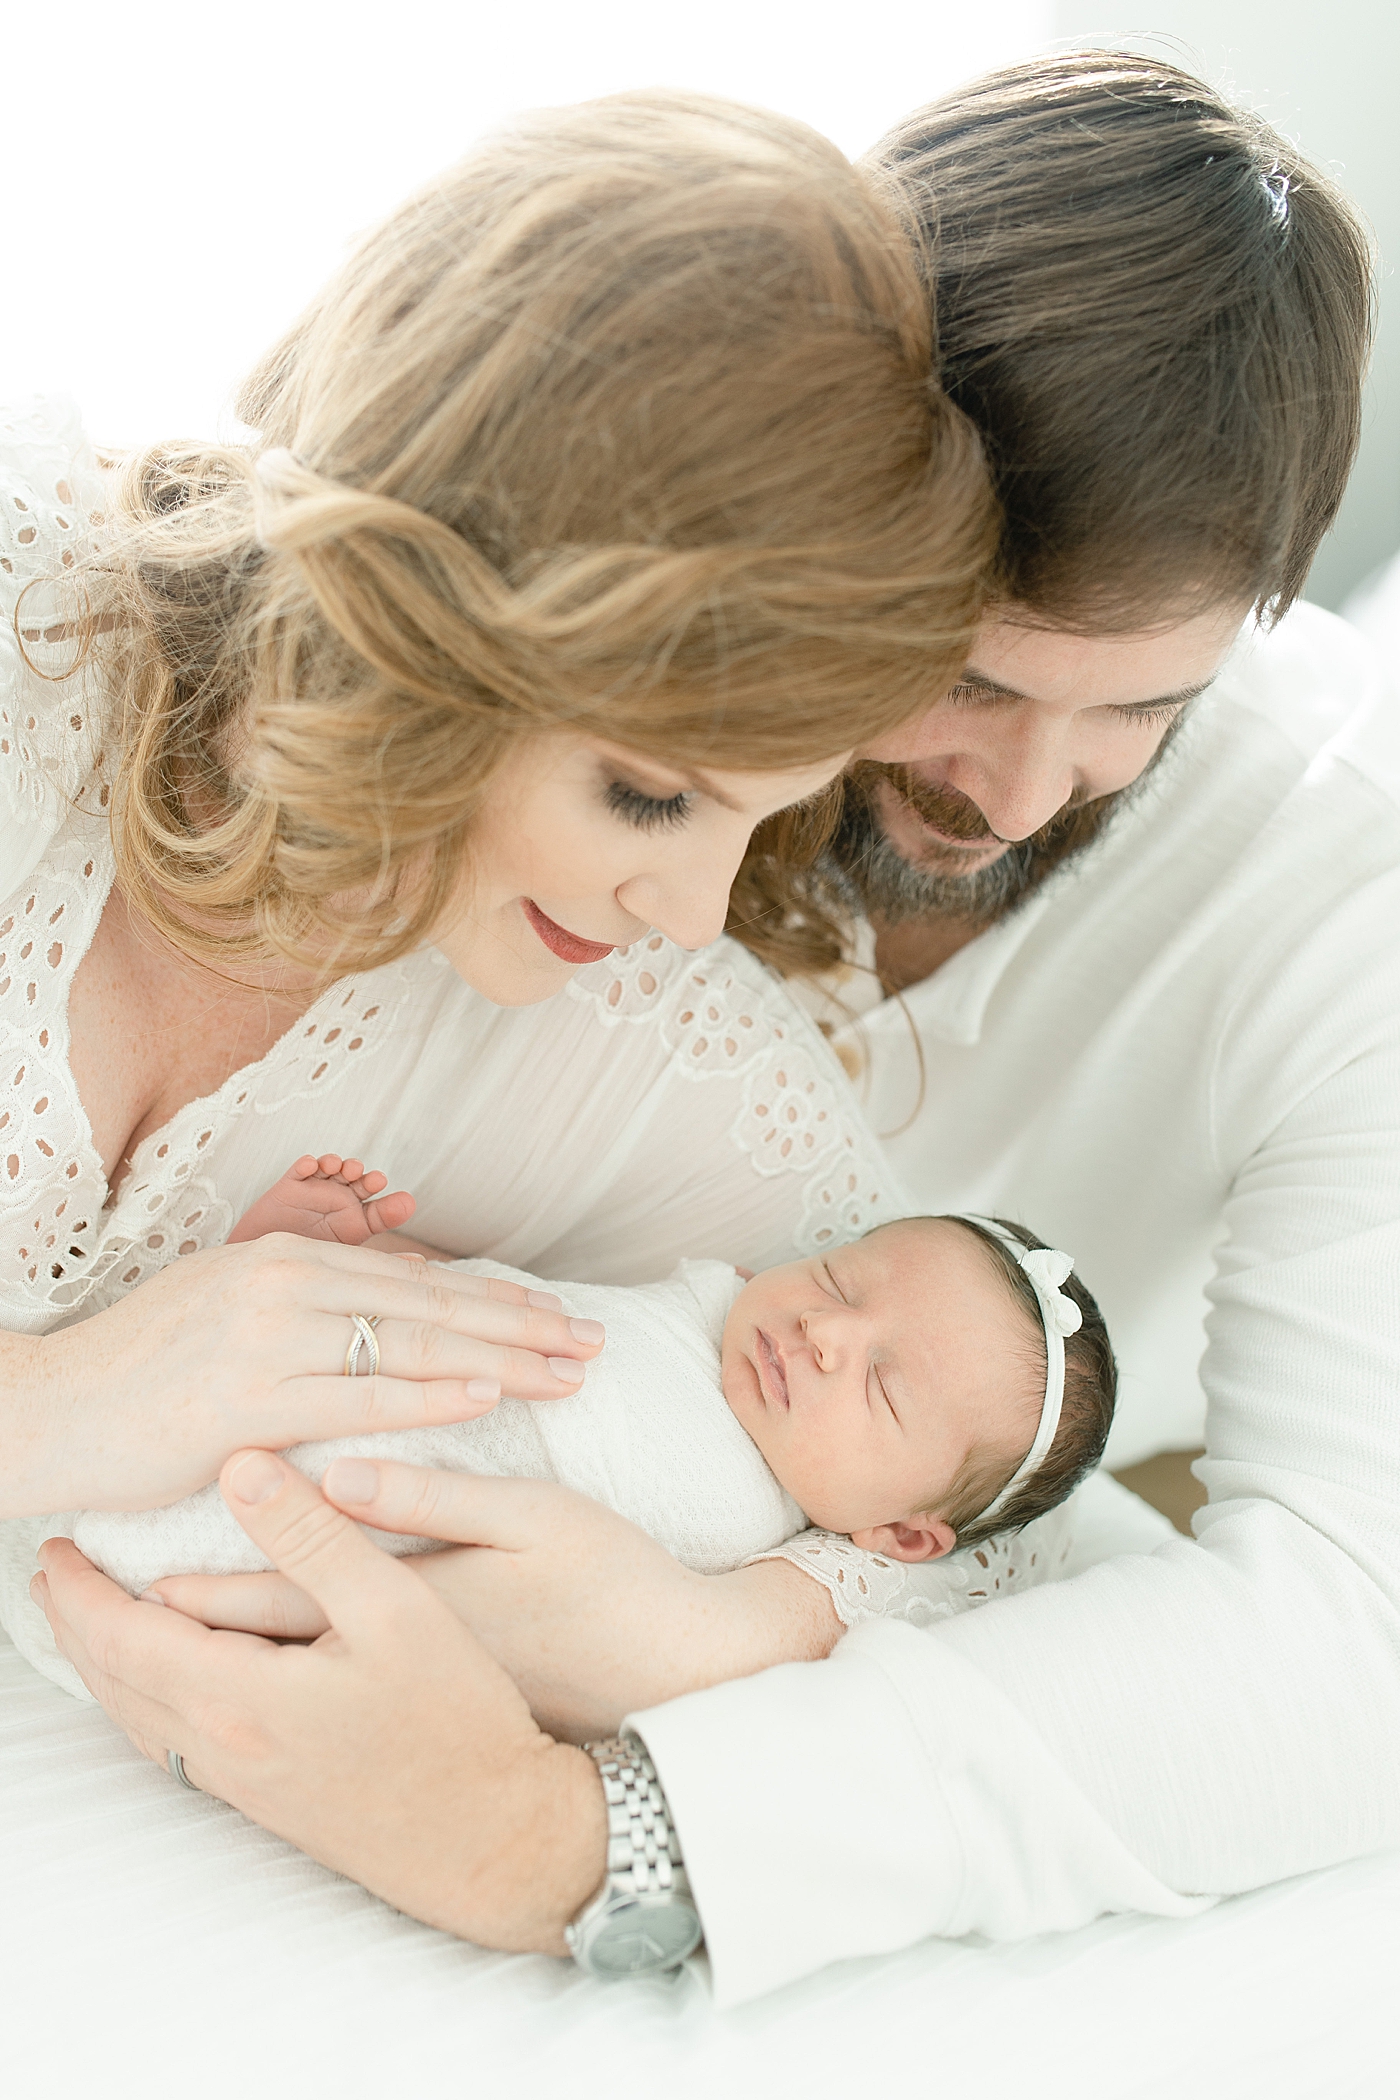 Mom and dad holding sleeping newborn baby girl | Photo by Little Sunshine Photography 